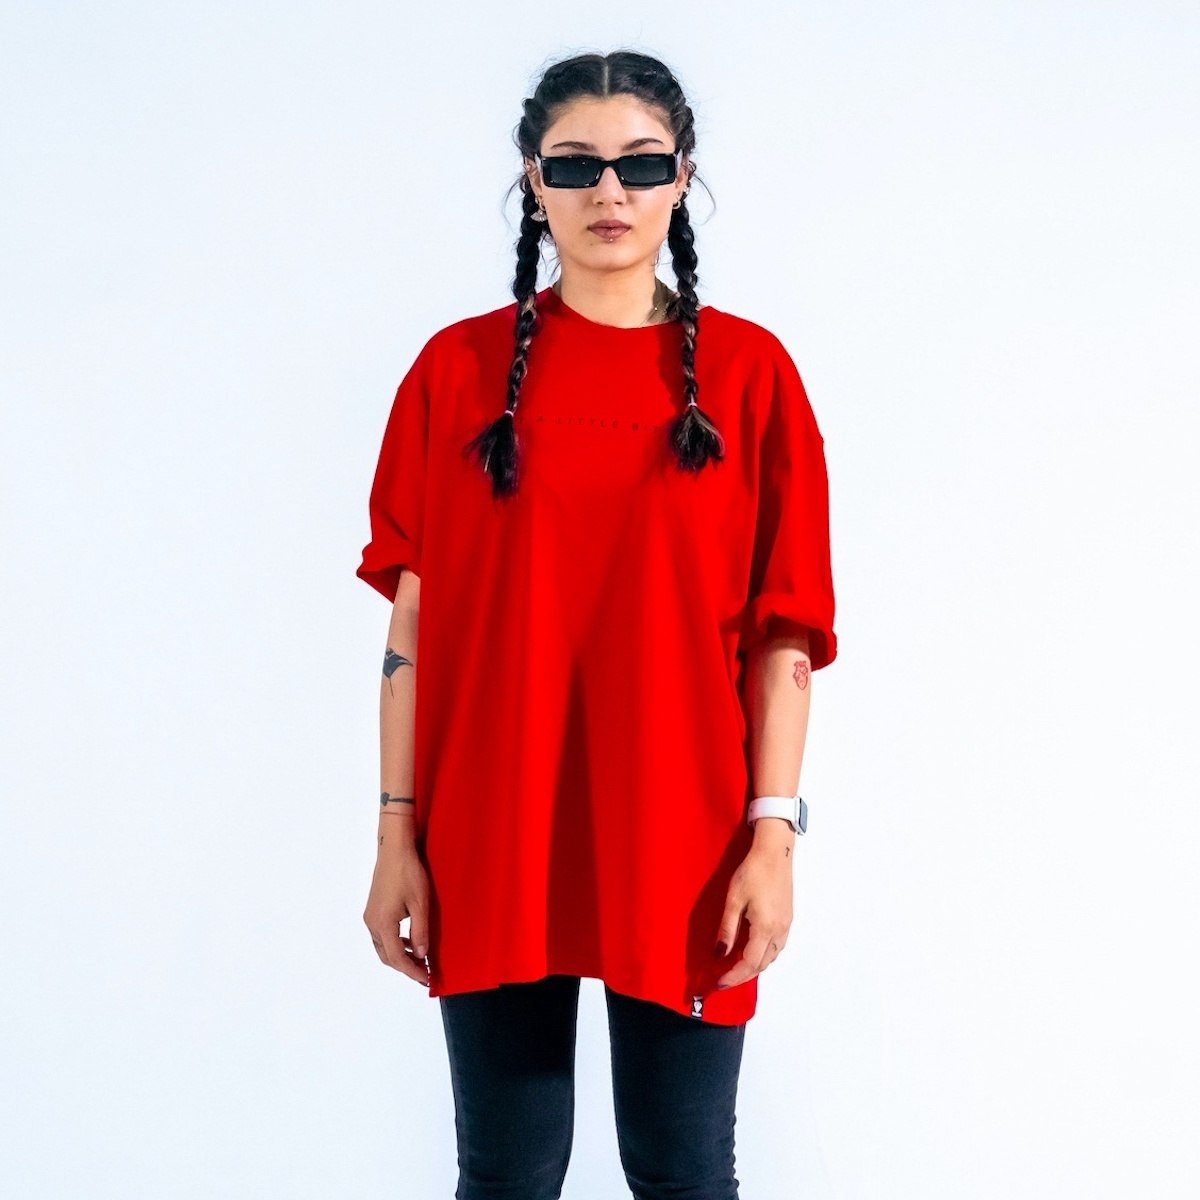 Unisex Text Printed Oversize Red T-shirt